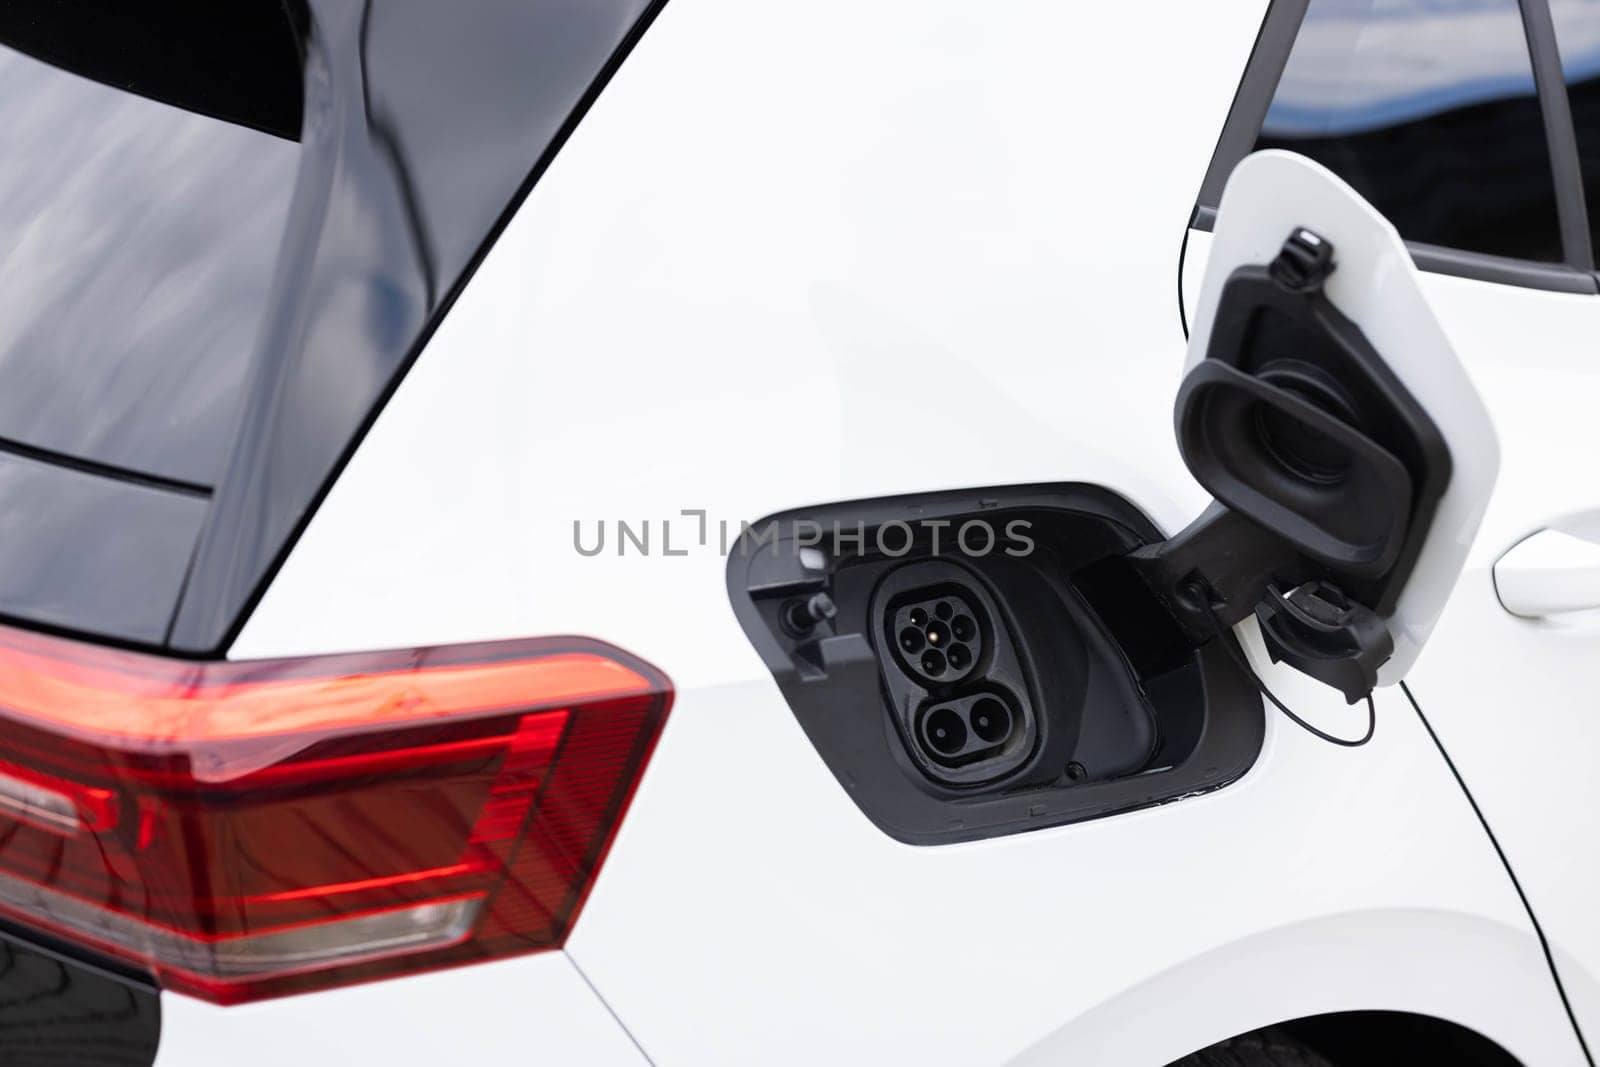 Fast charging socket type 2 combo electric car. Type 2 CCS plug port on electric vehicle. DC - CCS type 2 EV charging connector at EV car. Eco friendly alternative energy green environment concept